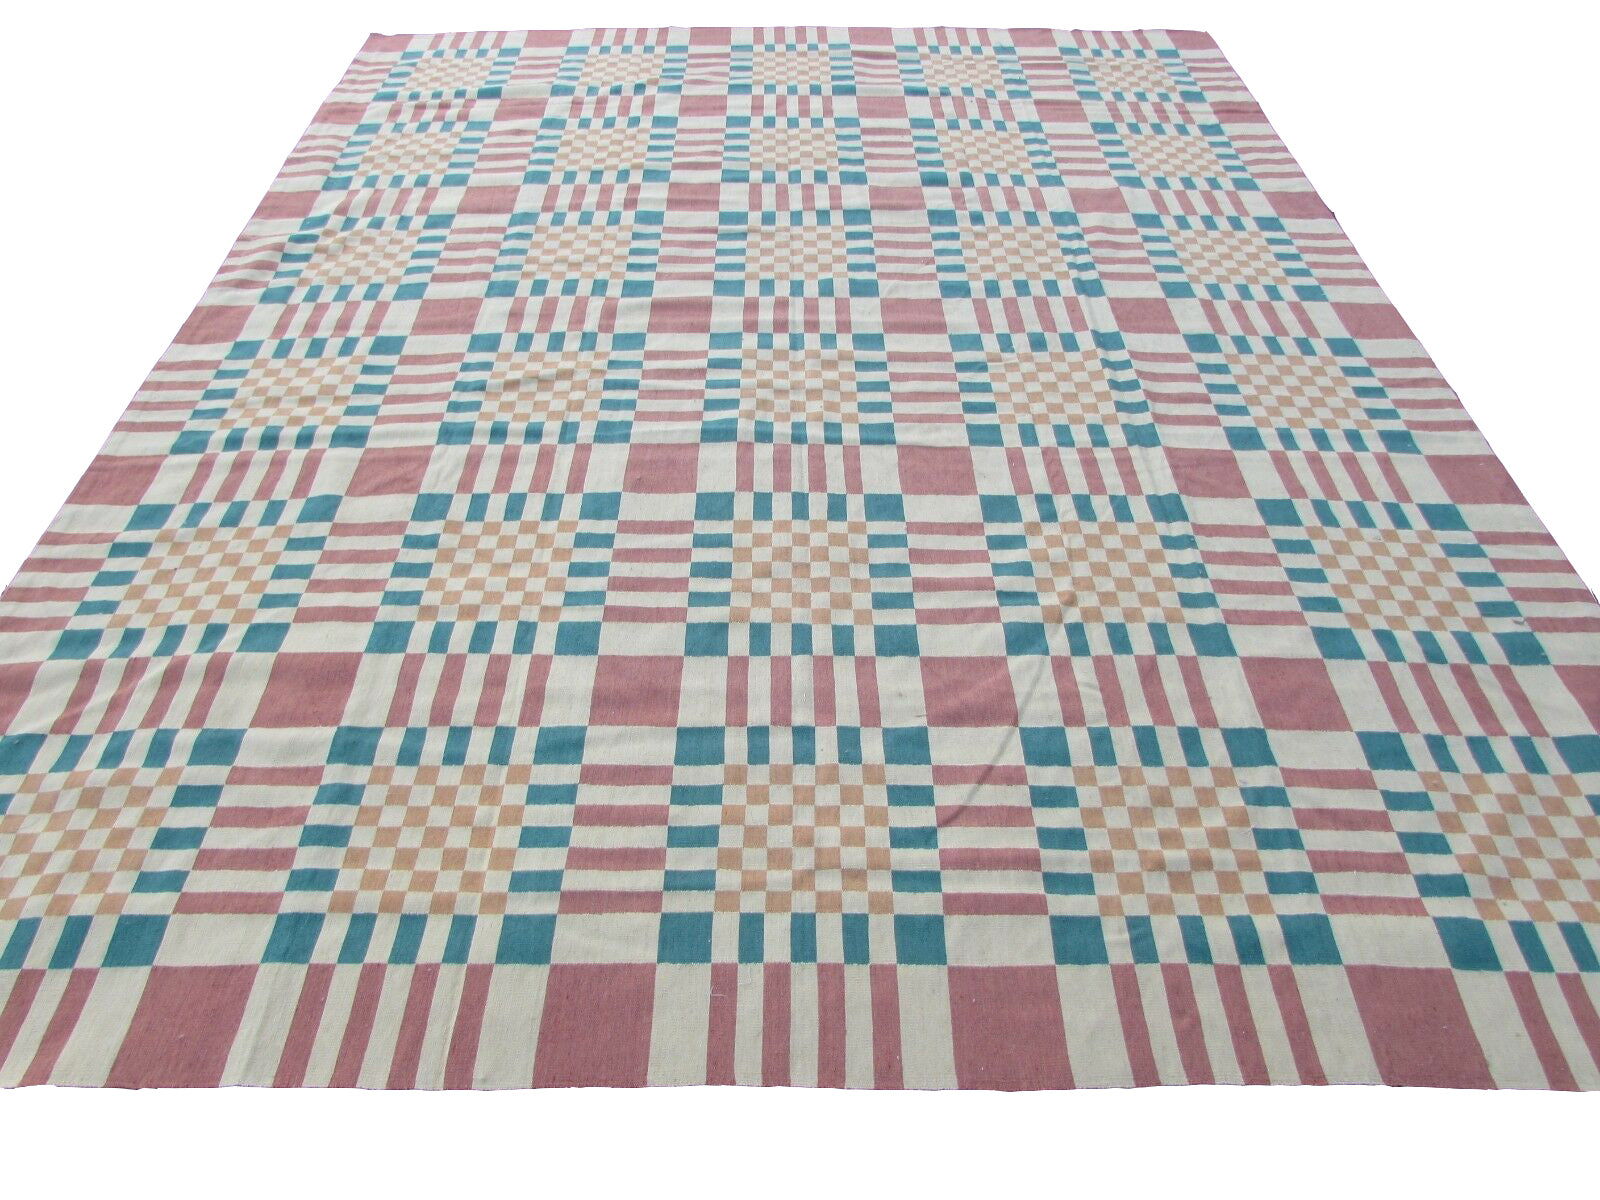 Vintage French Aubusson Rug - Geometric Design with Colorful Squares - Circa 1970s 